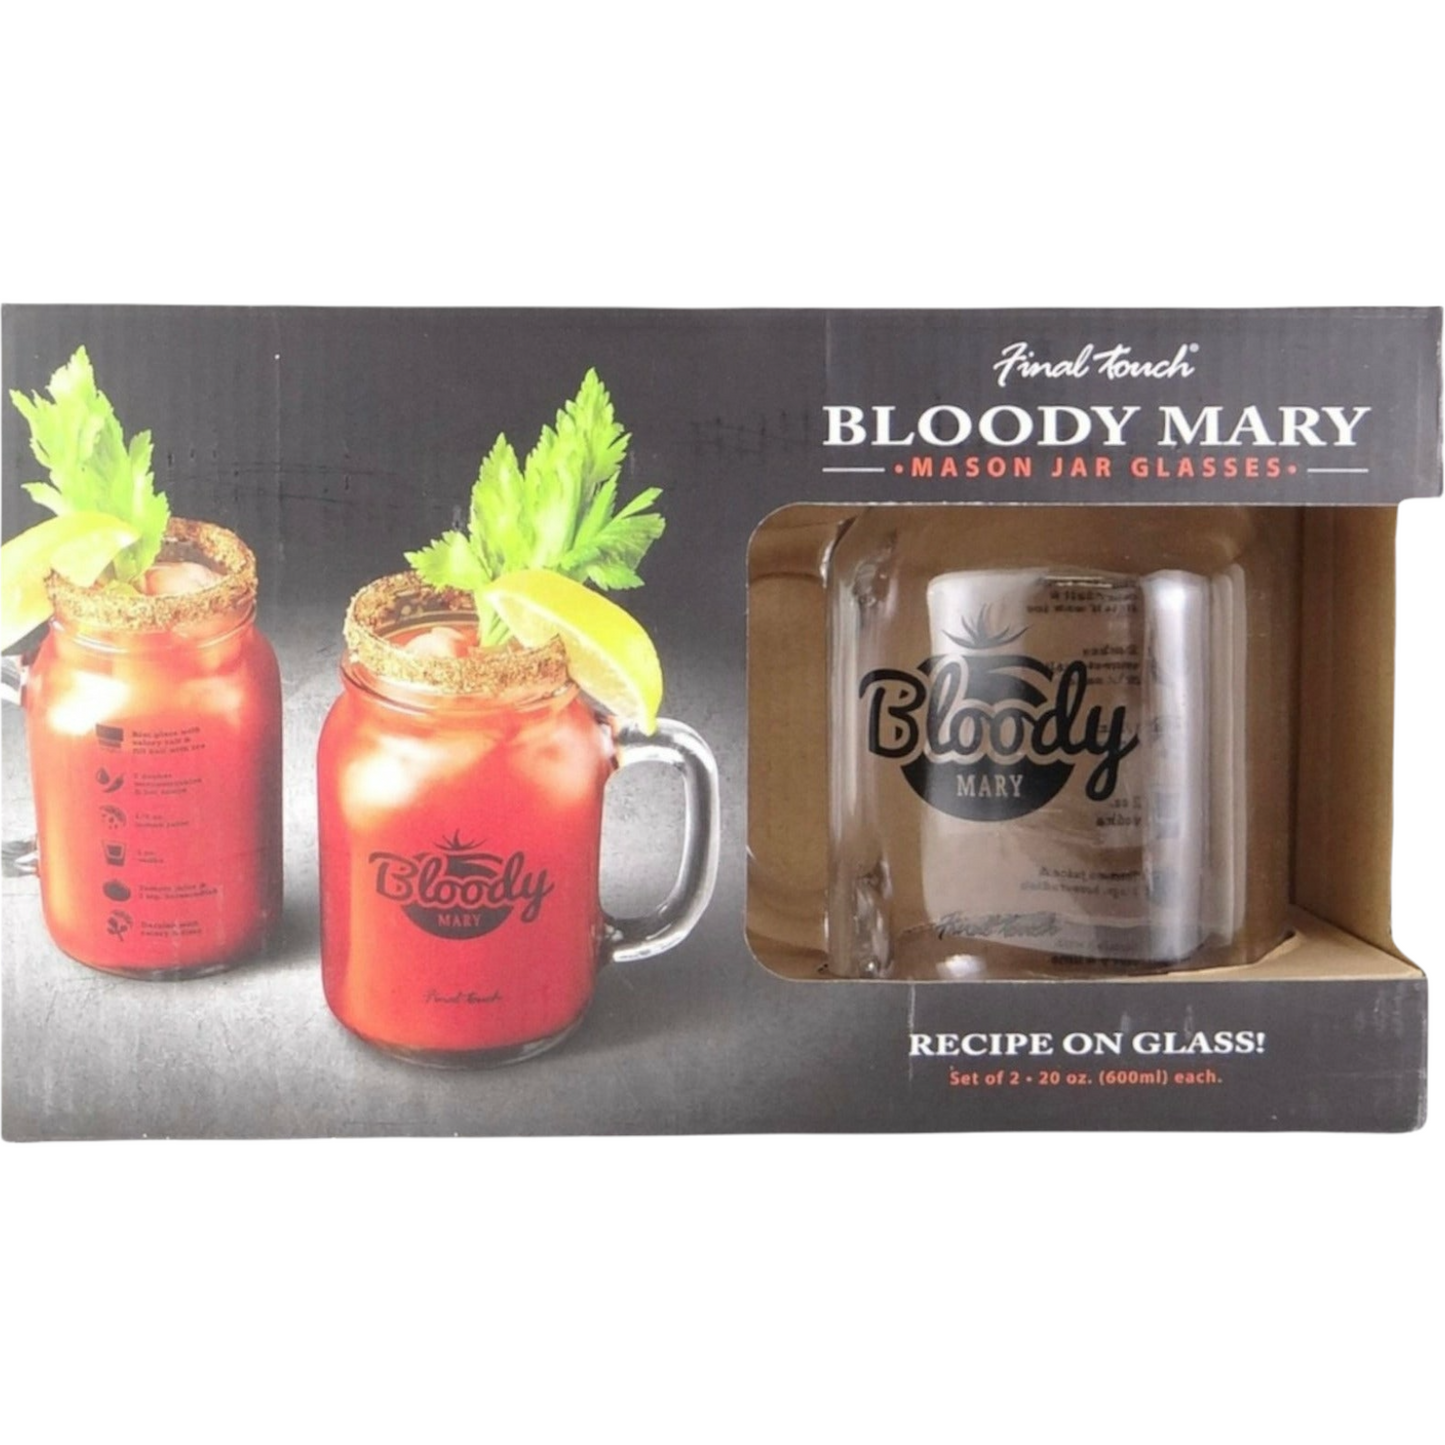 BLOODY MARY GLASSES